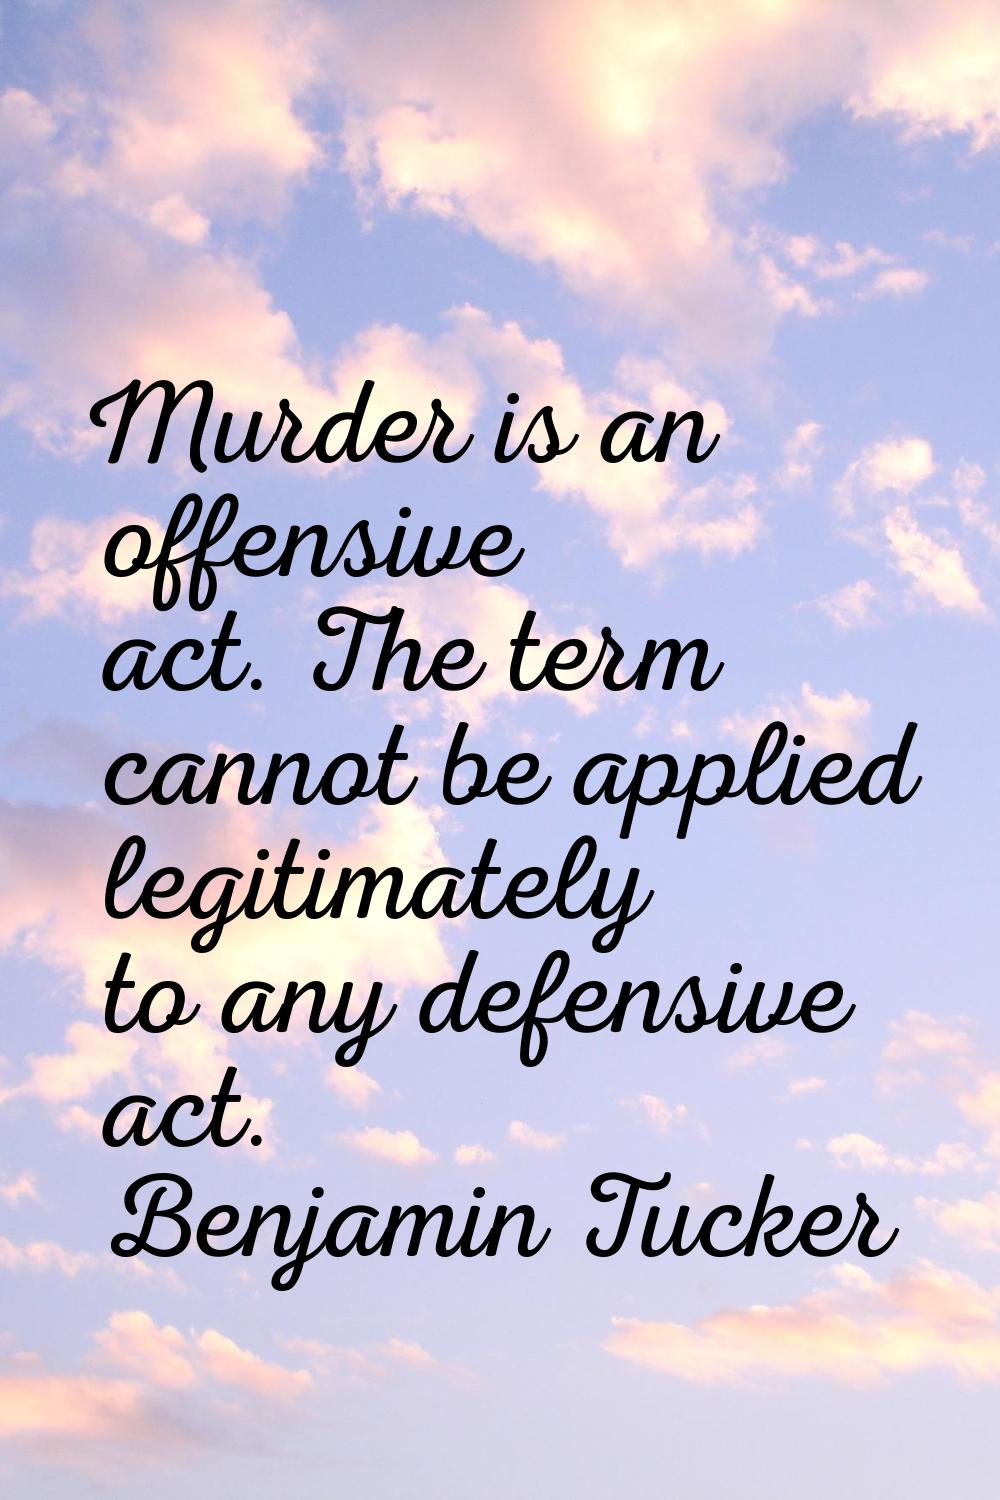 Murder is an offensive act. The term cannot be applied legitimately to any defensive act.